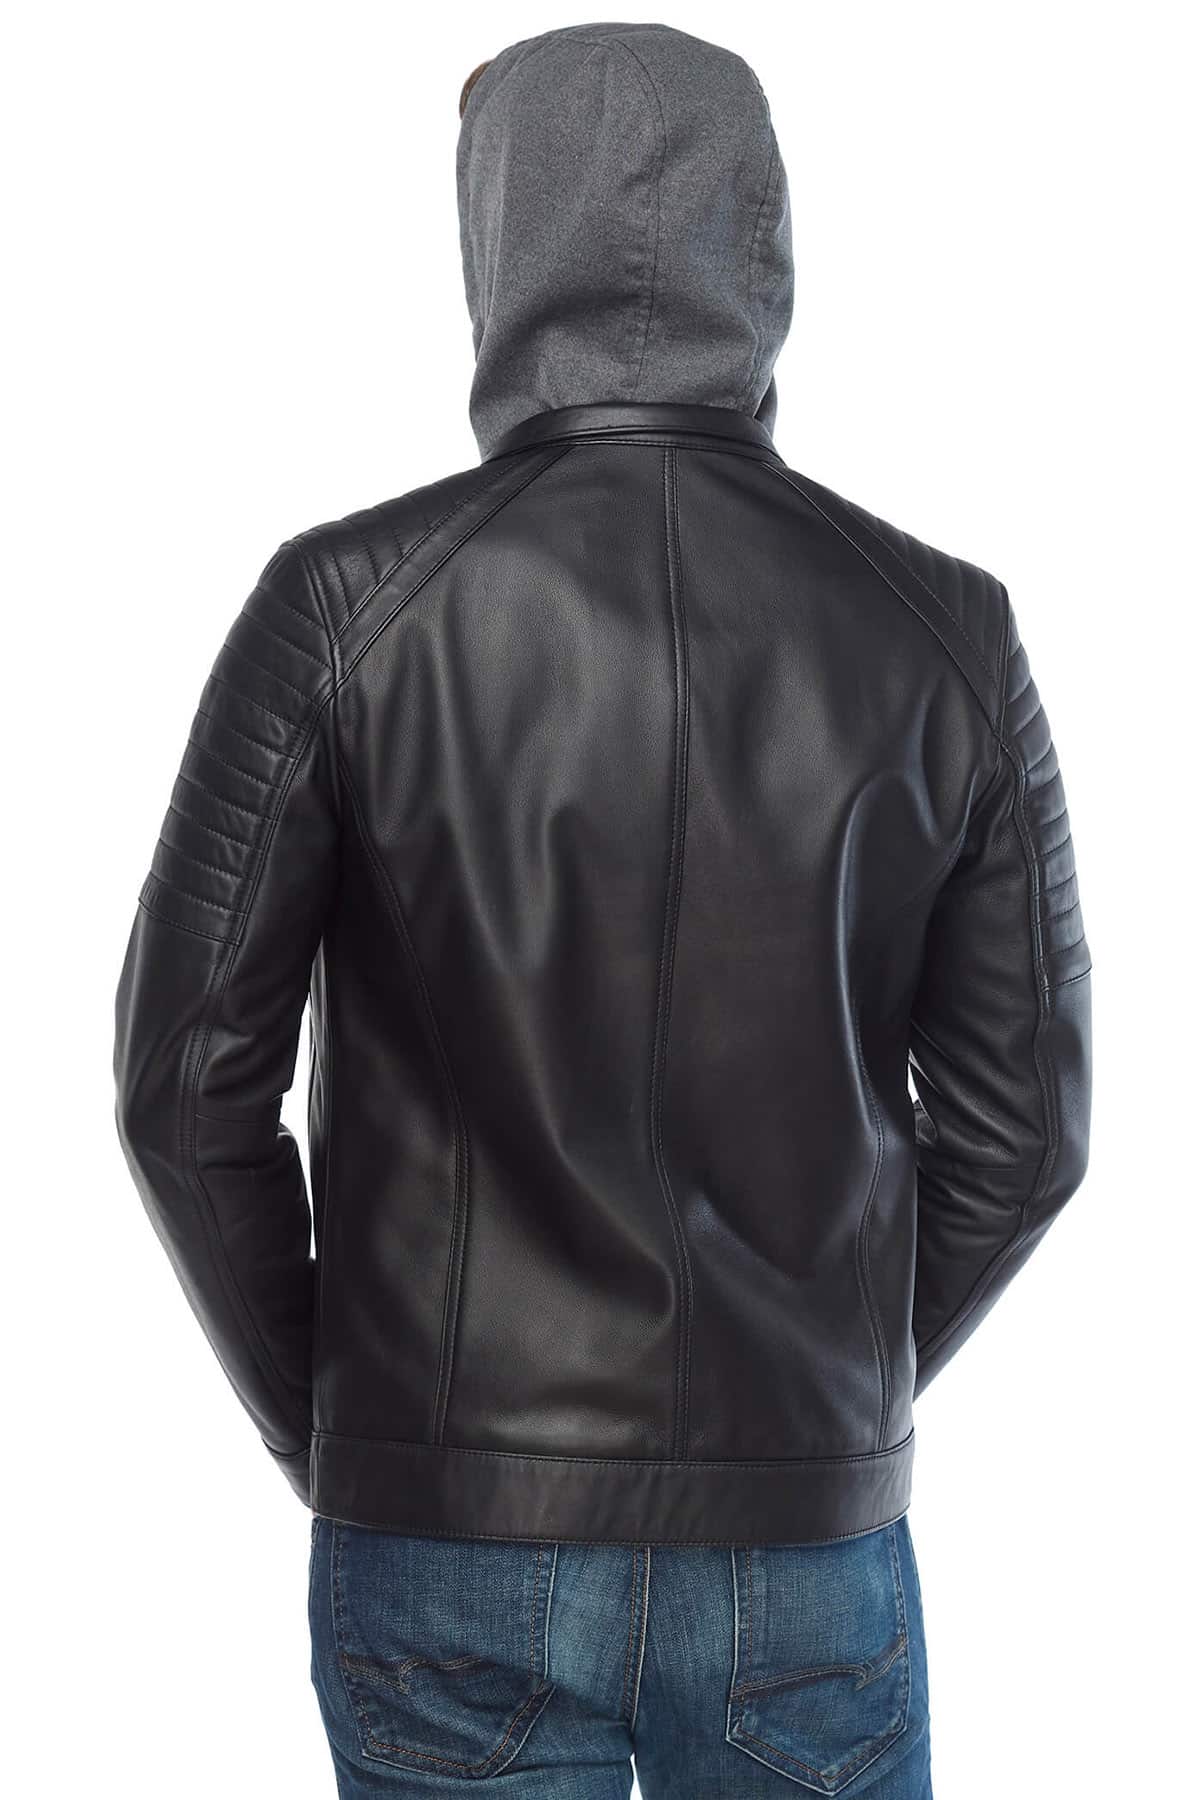 You've Searched for Black Hooded Men's Leather Jacket